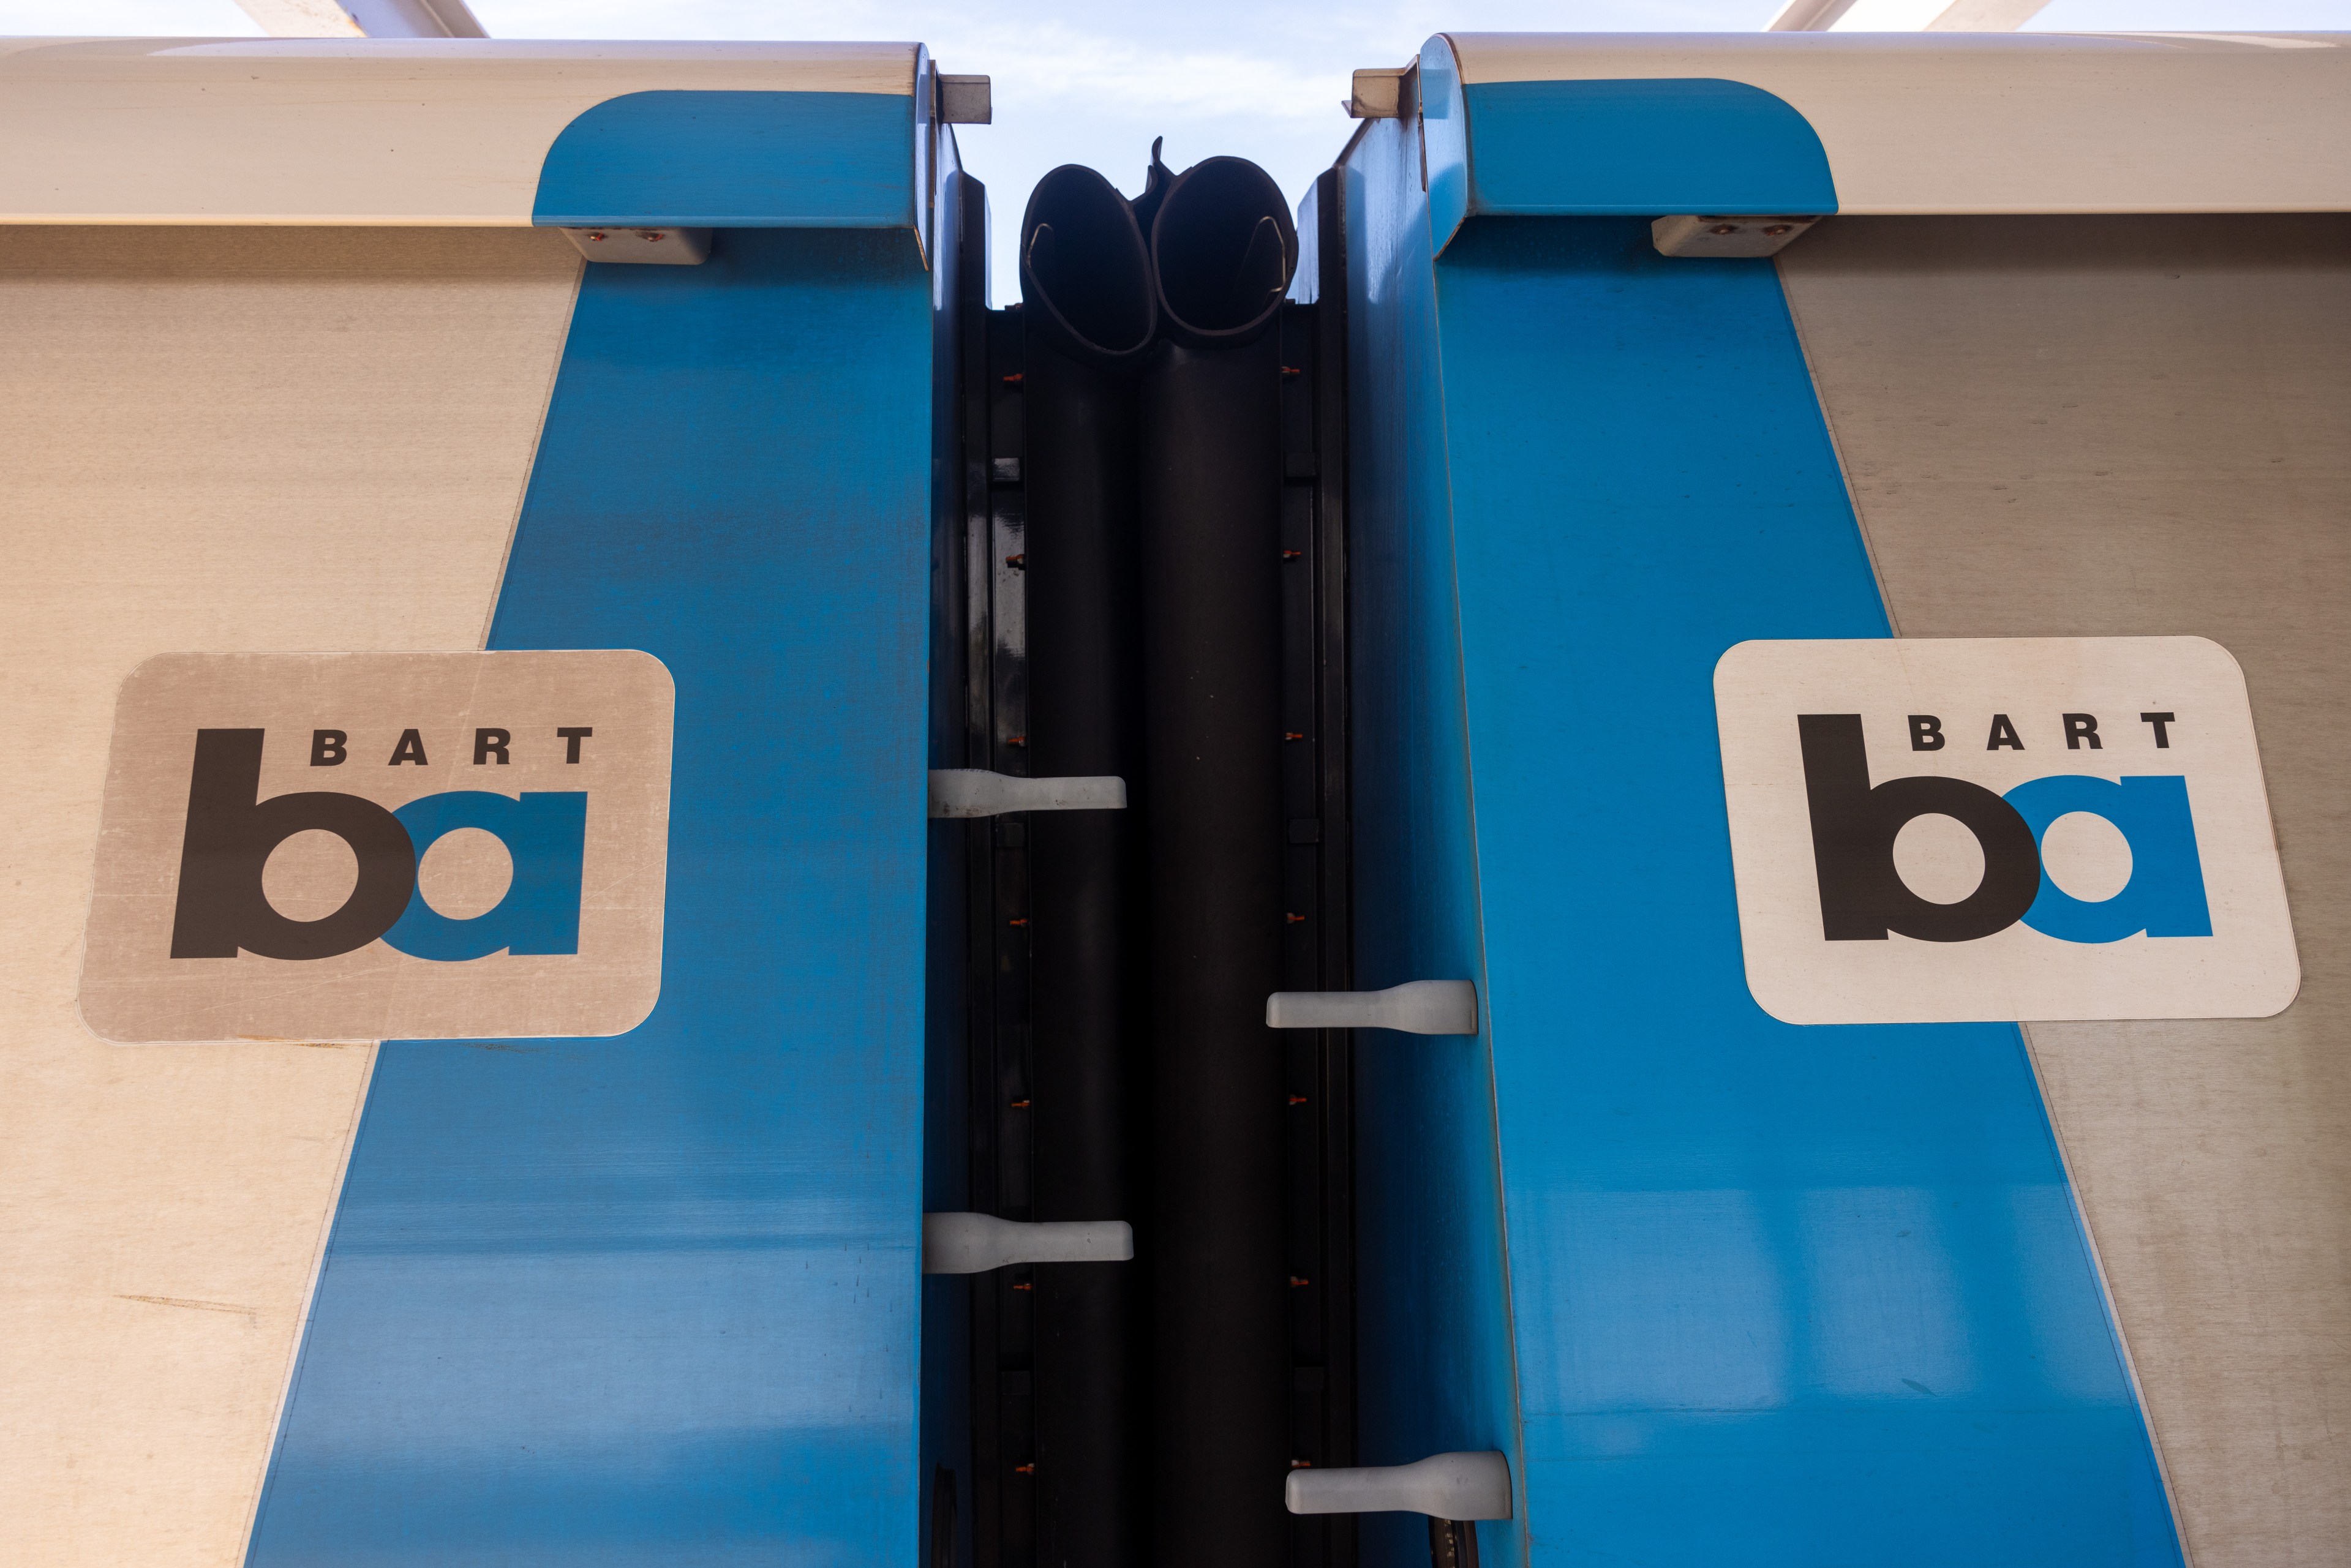 A photo shows the space between two BART train carriages.